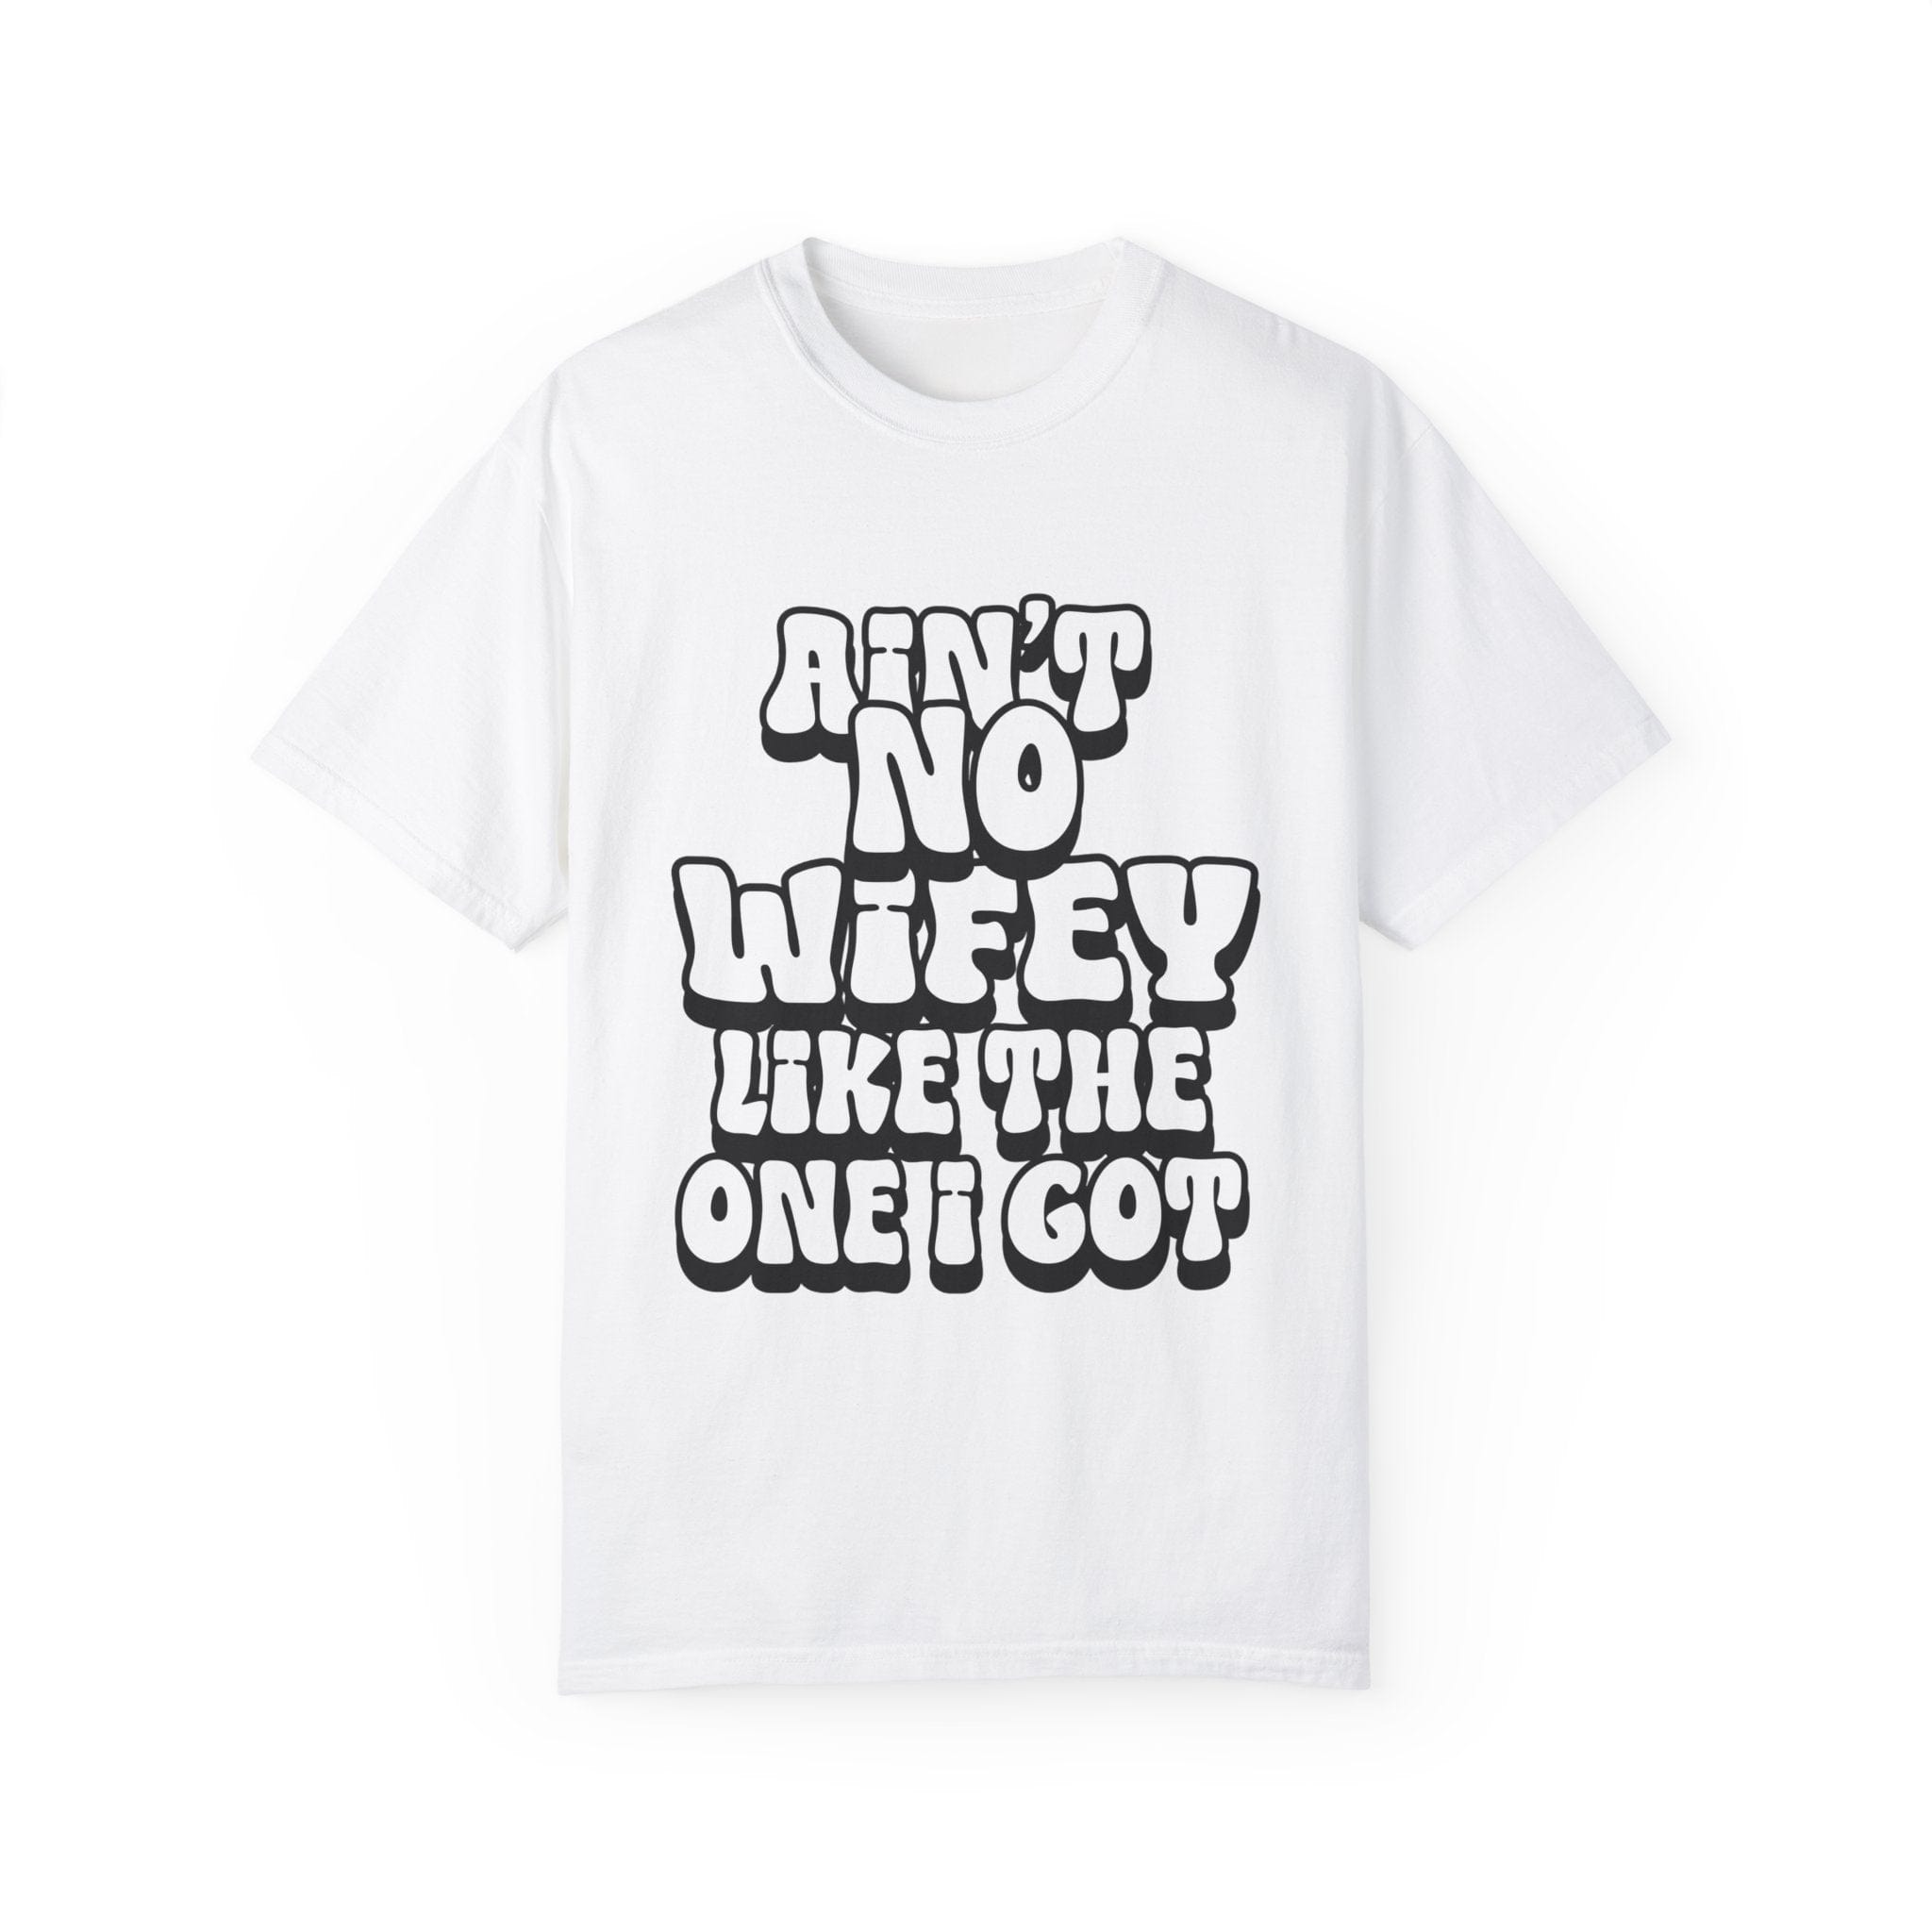 Ain't Wifey Like The One I Got | Printed on Comfort Colors 1717®